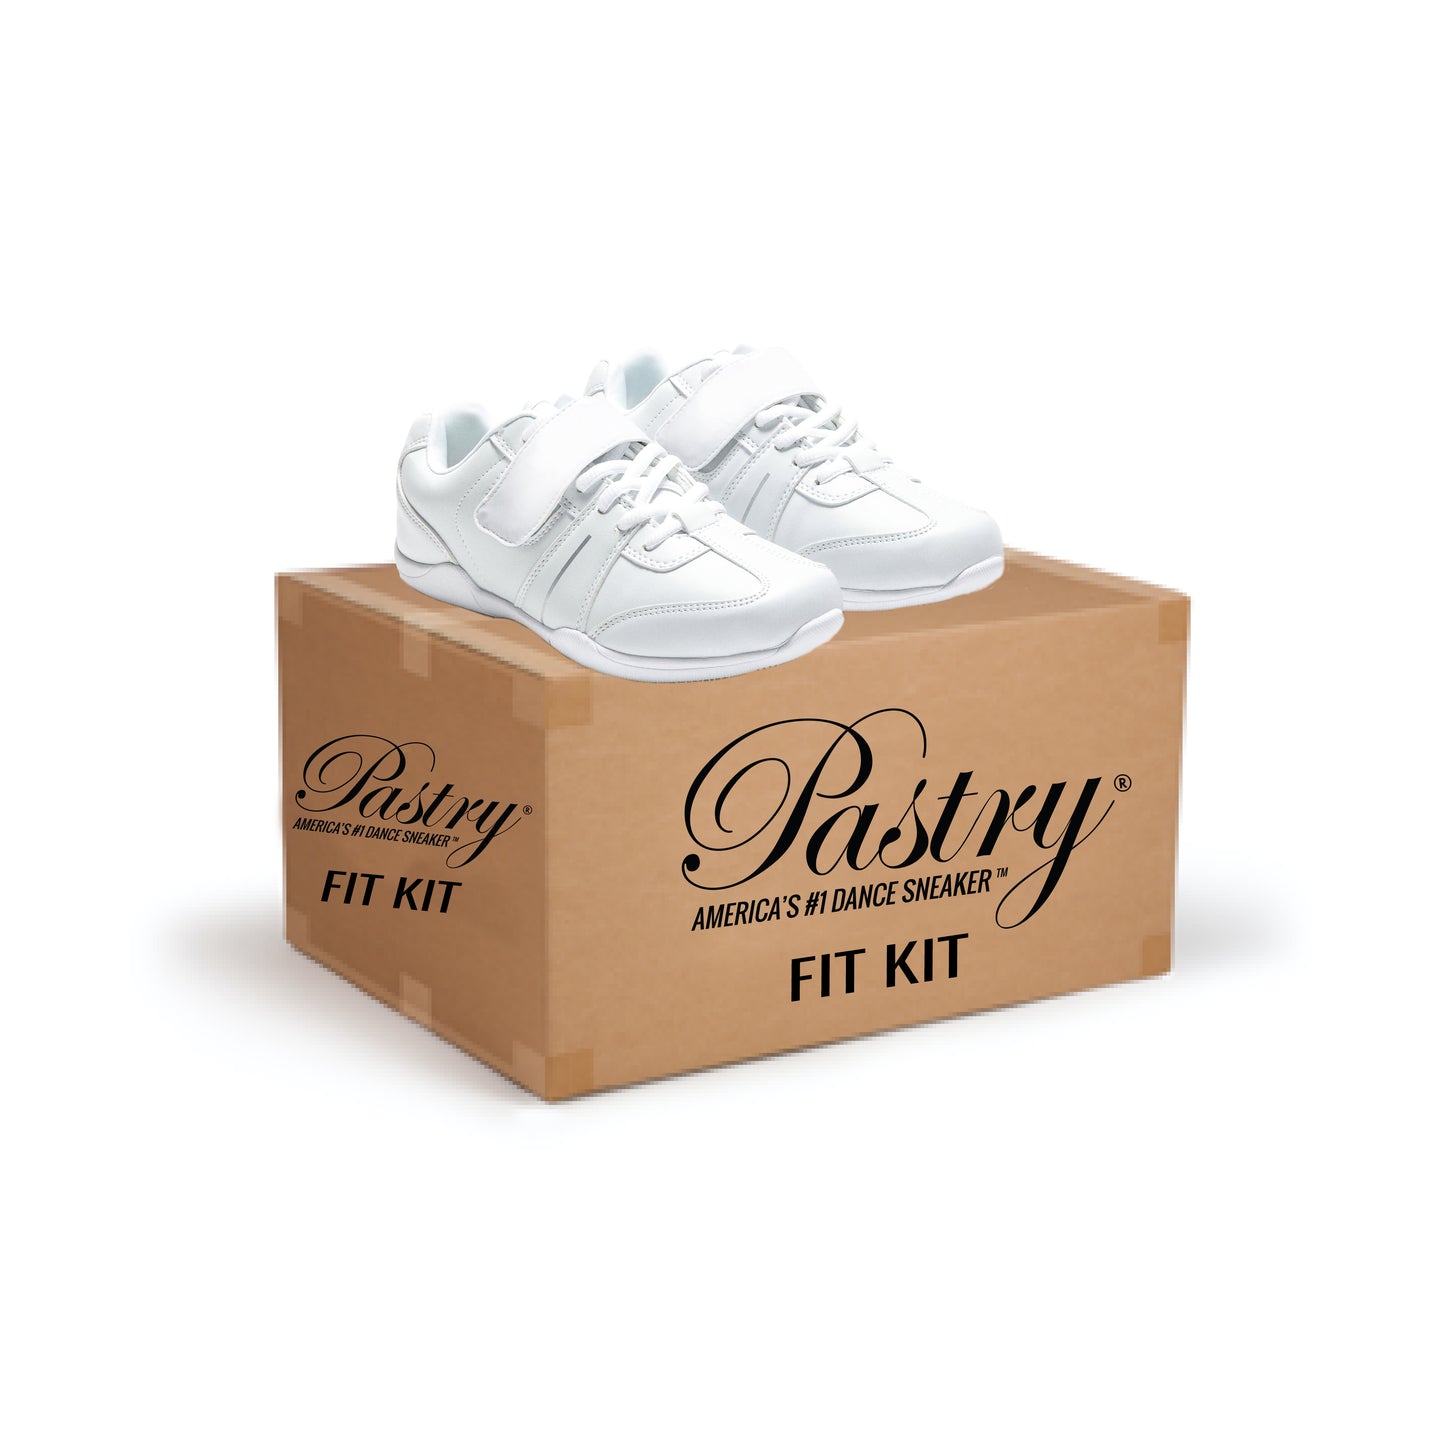 Pastry Fit Kits with Custom Spirit Cheer Sneaker in white